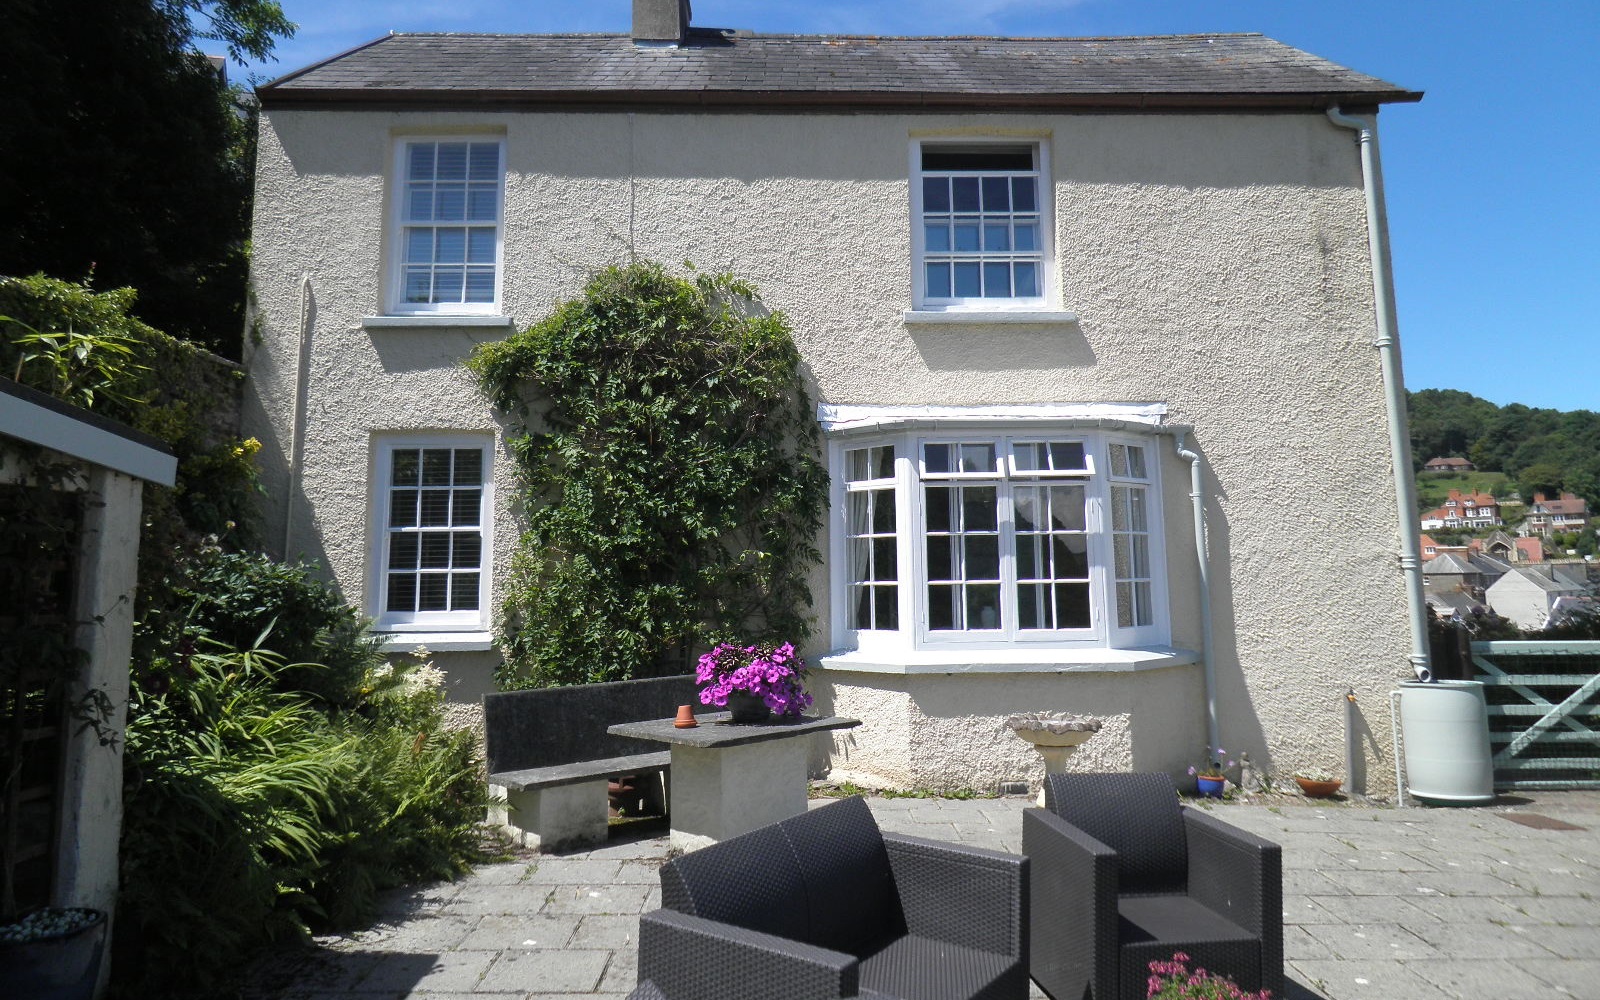 Self Catering Holiday Let Apartments Cottage Lynton Lynmouth